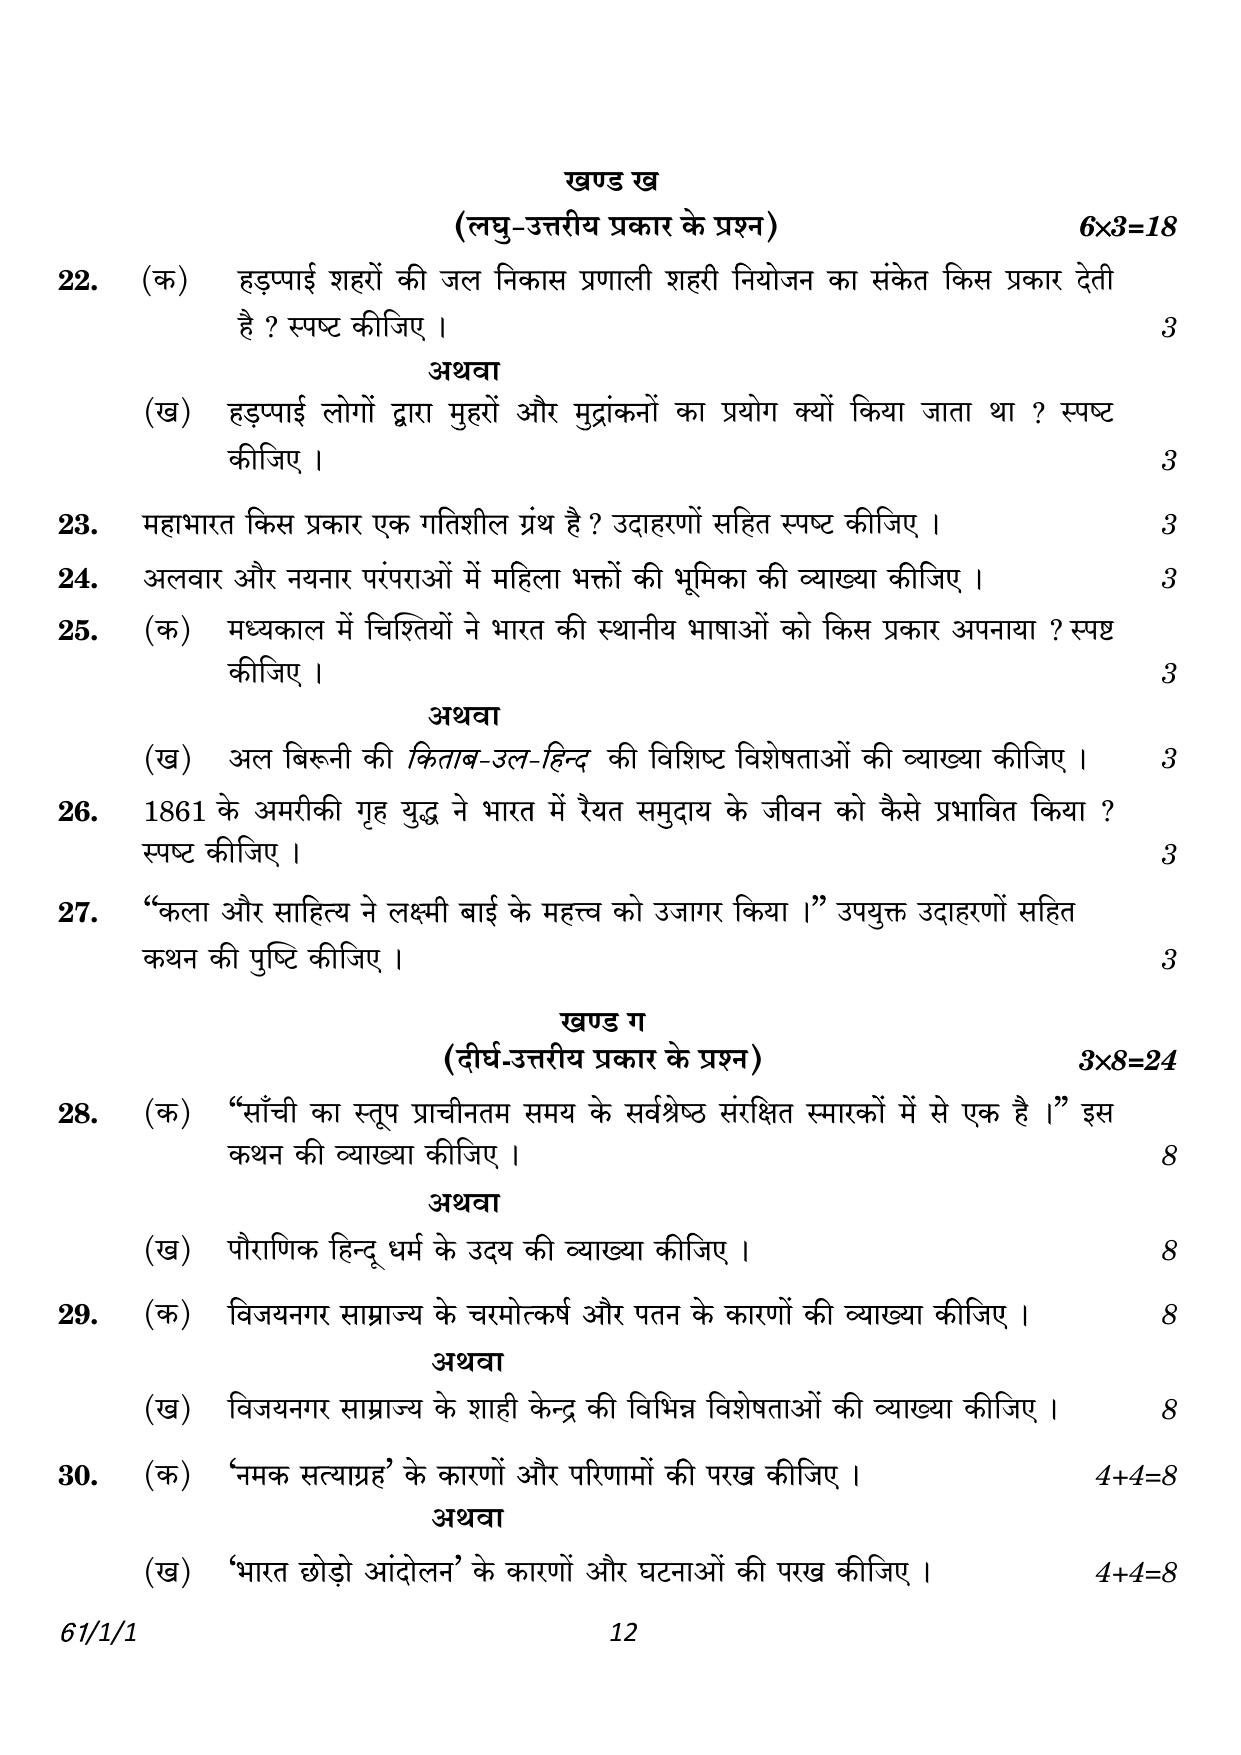 CBSE Class 12 61-1-1 History 2023 Question Paper - Page 12